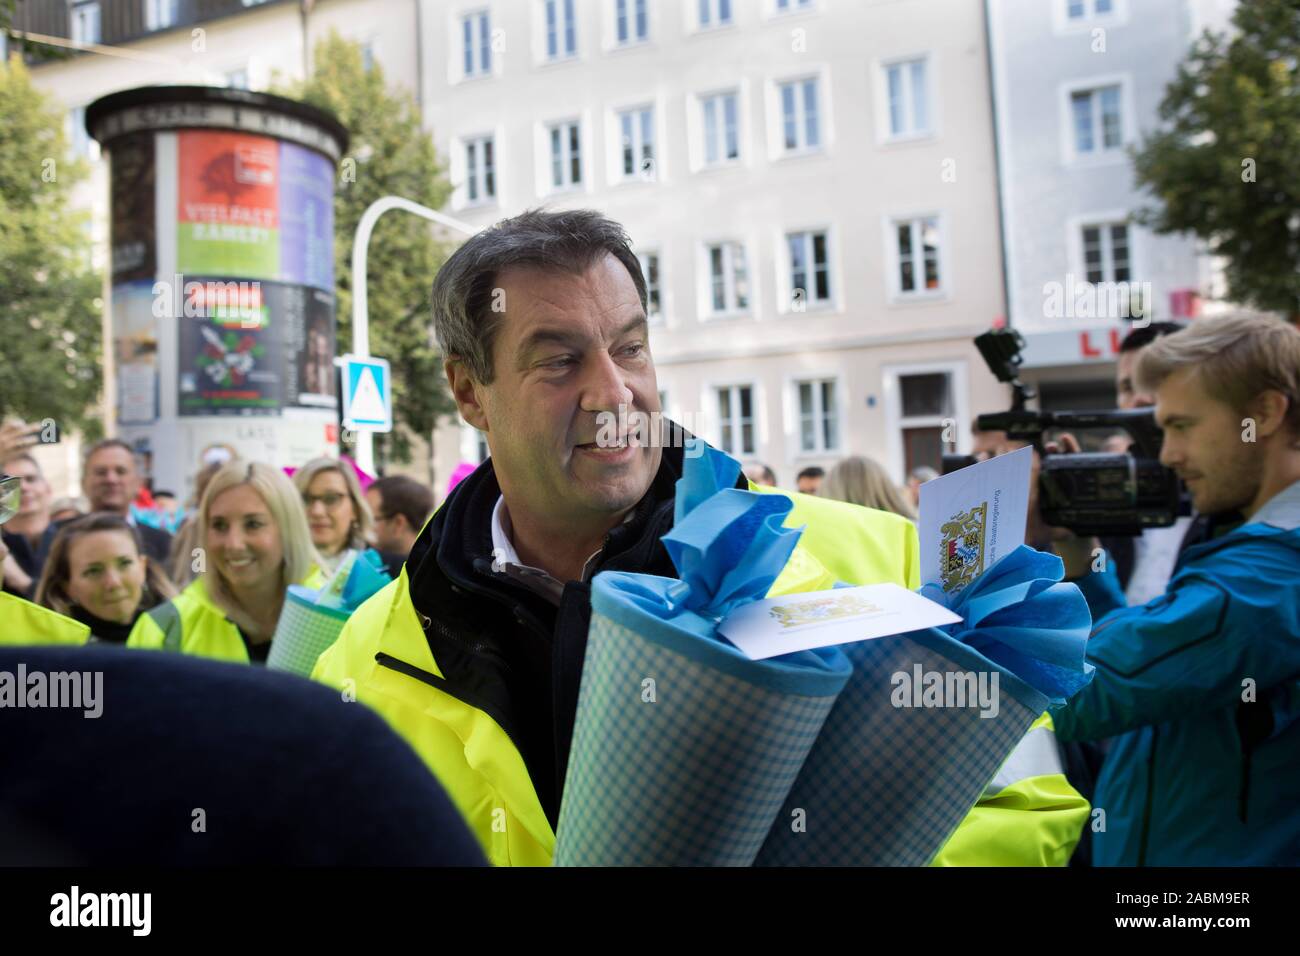 Prime Minister Markus Söder (pictured with double school bag) works as a student pilot on the first day of school in front of the St.-Anna primary school in Lehel. [automated translation] Stock Photo